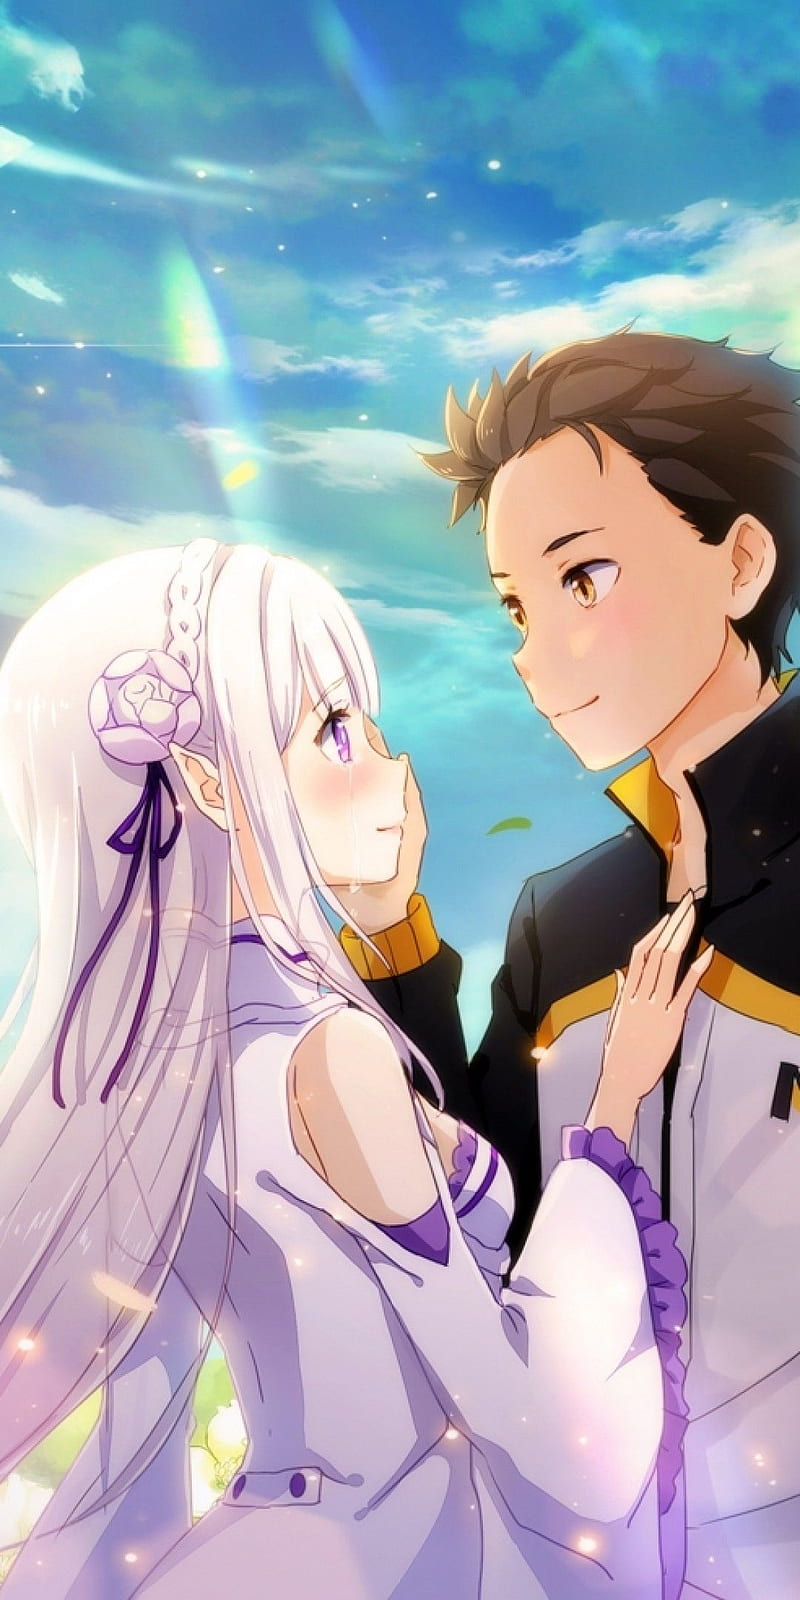 Re:Zero: How Many Times Has Subaru Died in the Anime?